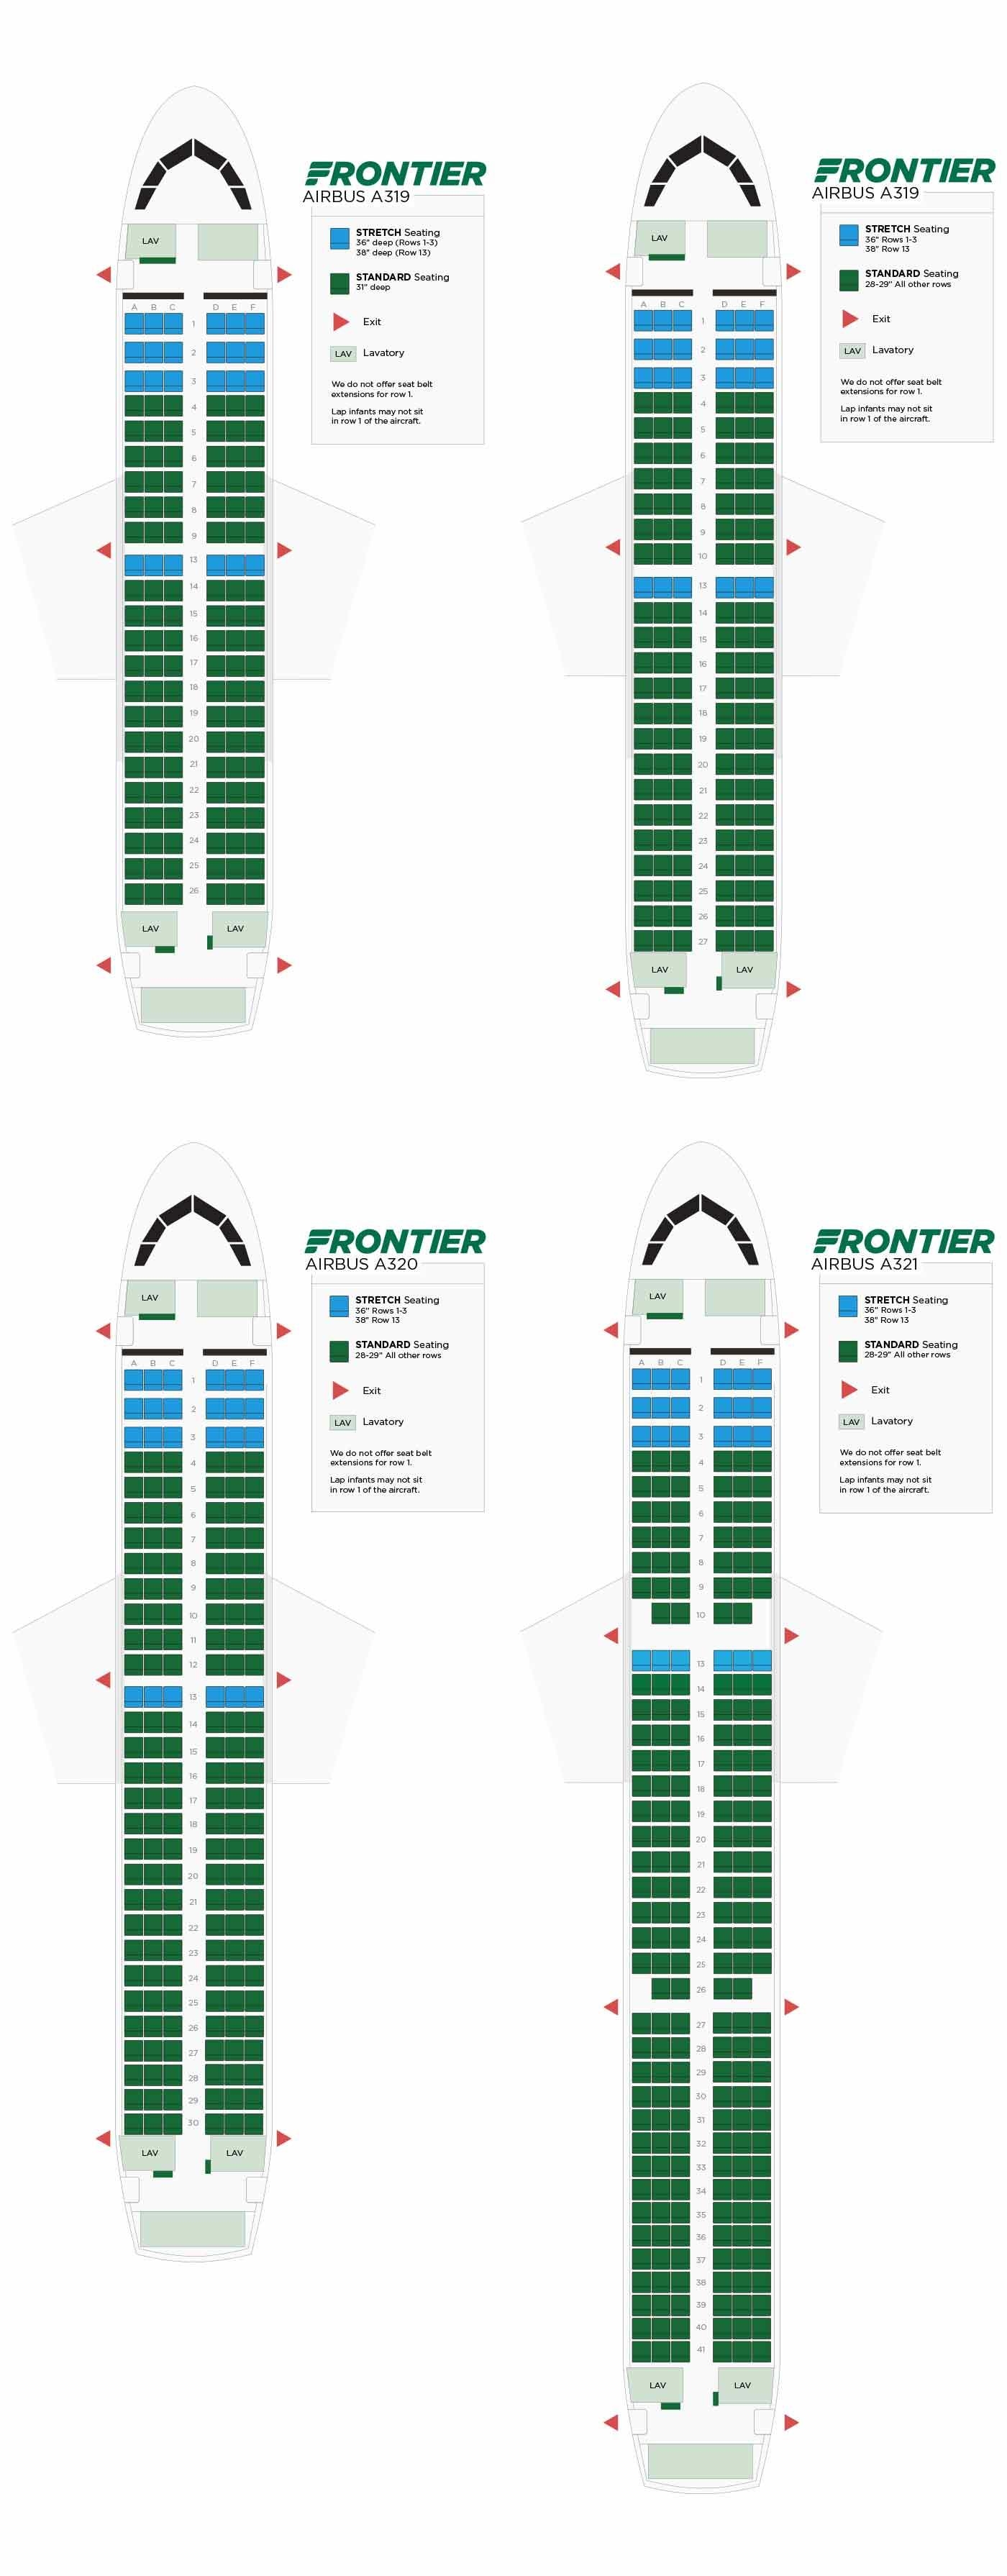 6 Pics Frontier Airlines Seating Chart Airbus A321 And Review Alqu Blog